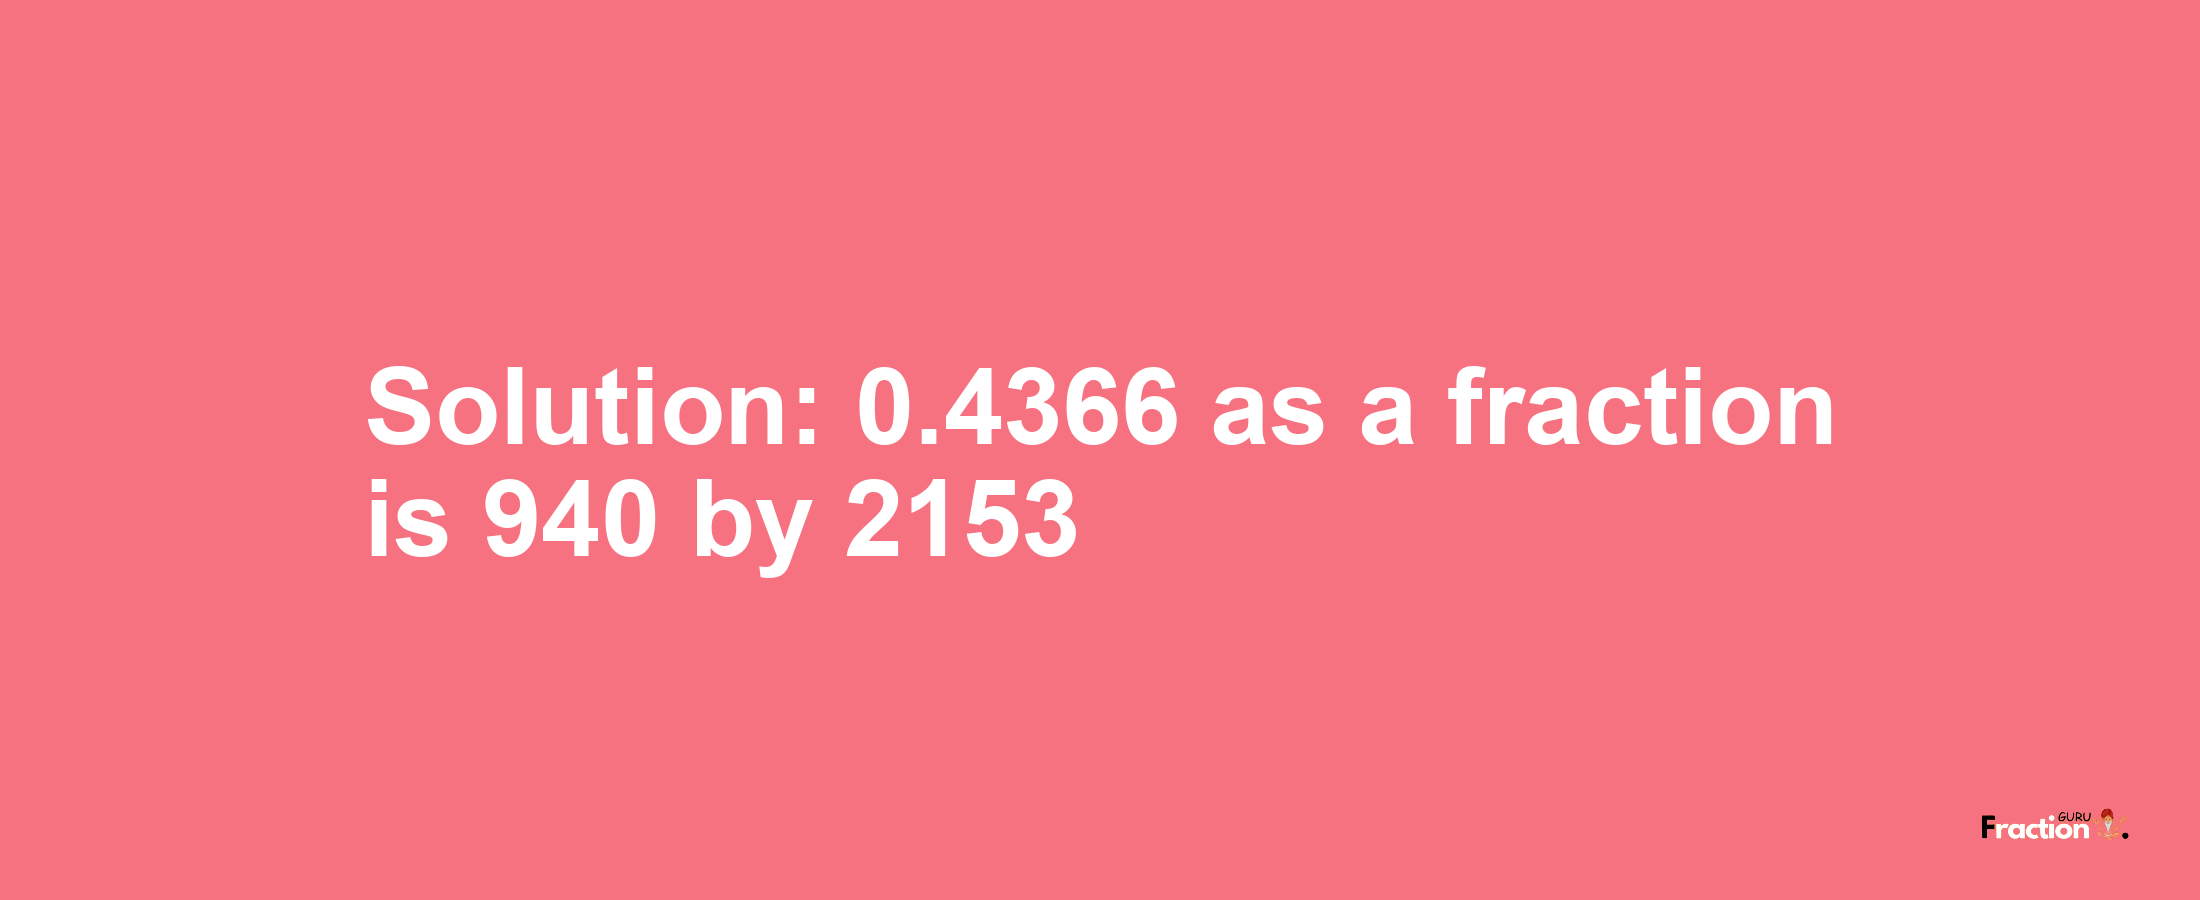 Solution:0.4366 as a fraction is 940/2153